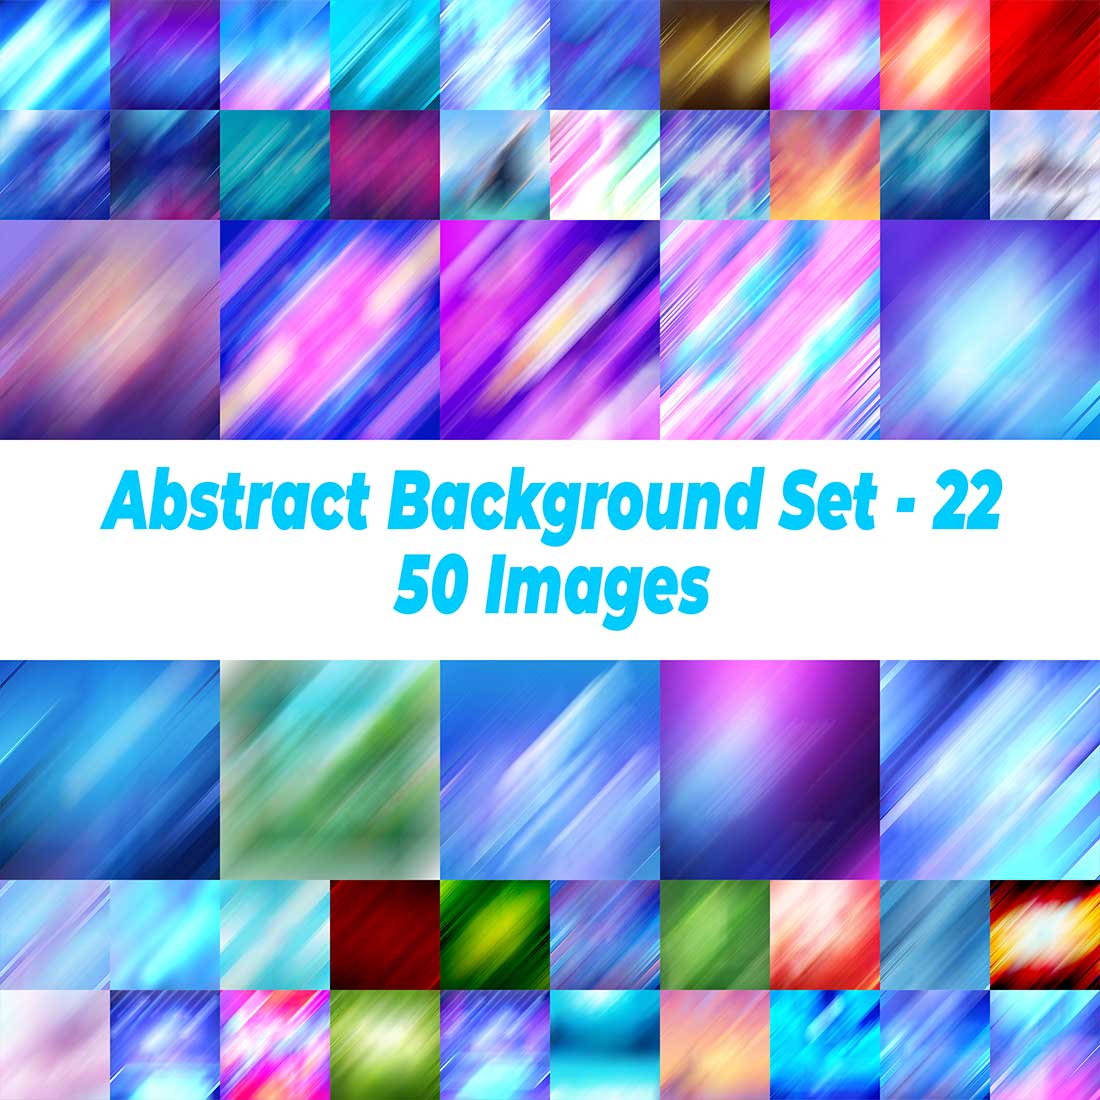 Abstract Gradient Background Luxury Vivid Blurred Colorful Texture Wallpaper Photo main cover.